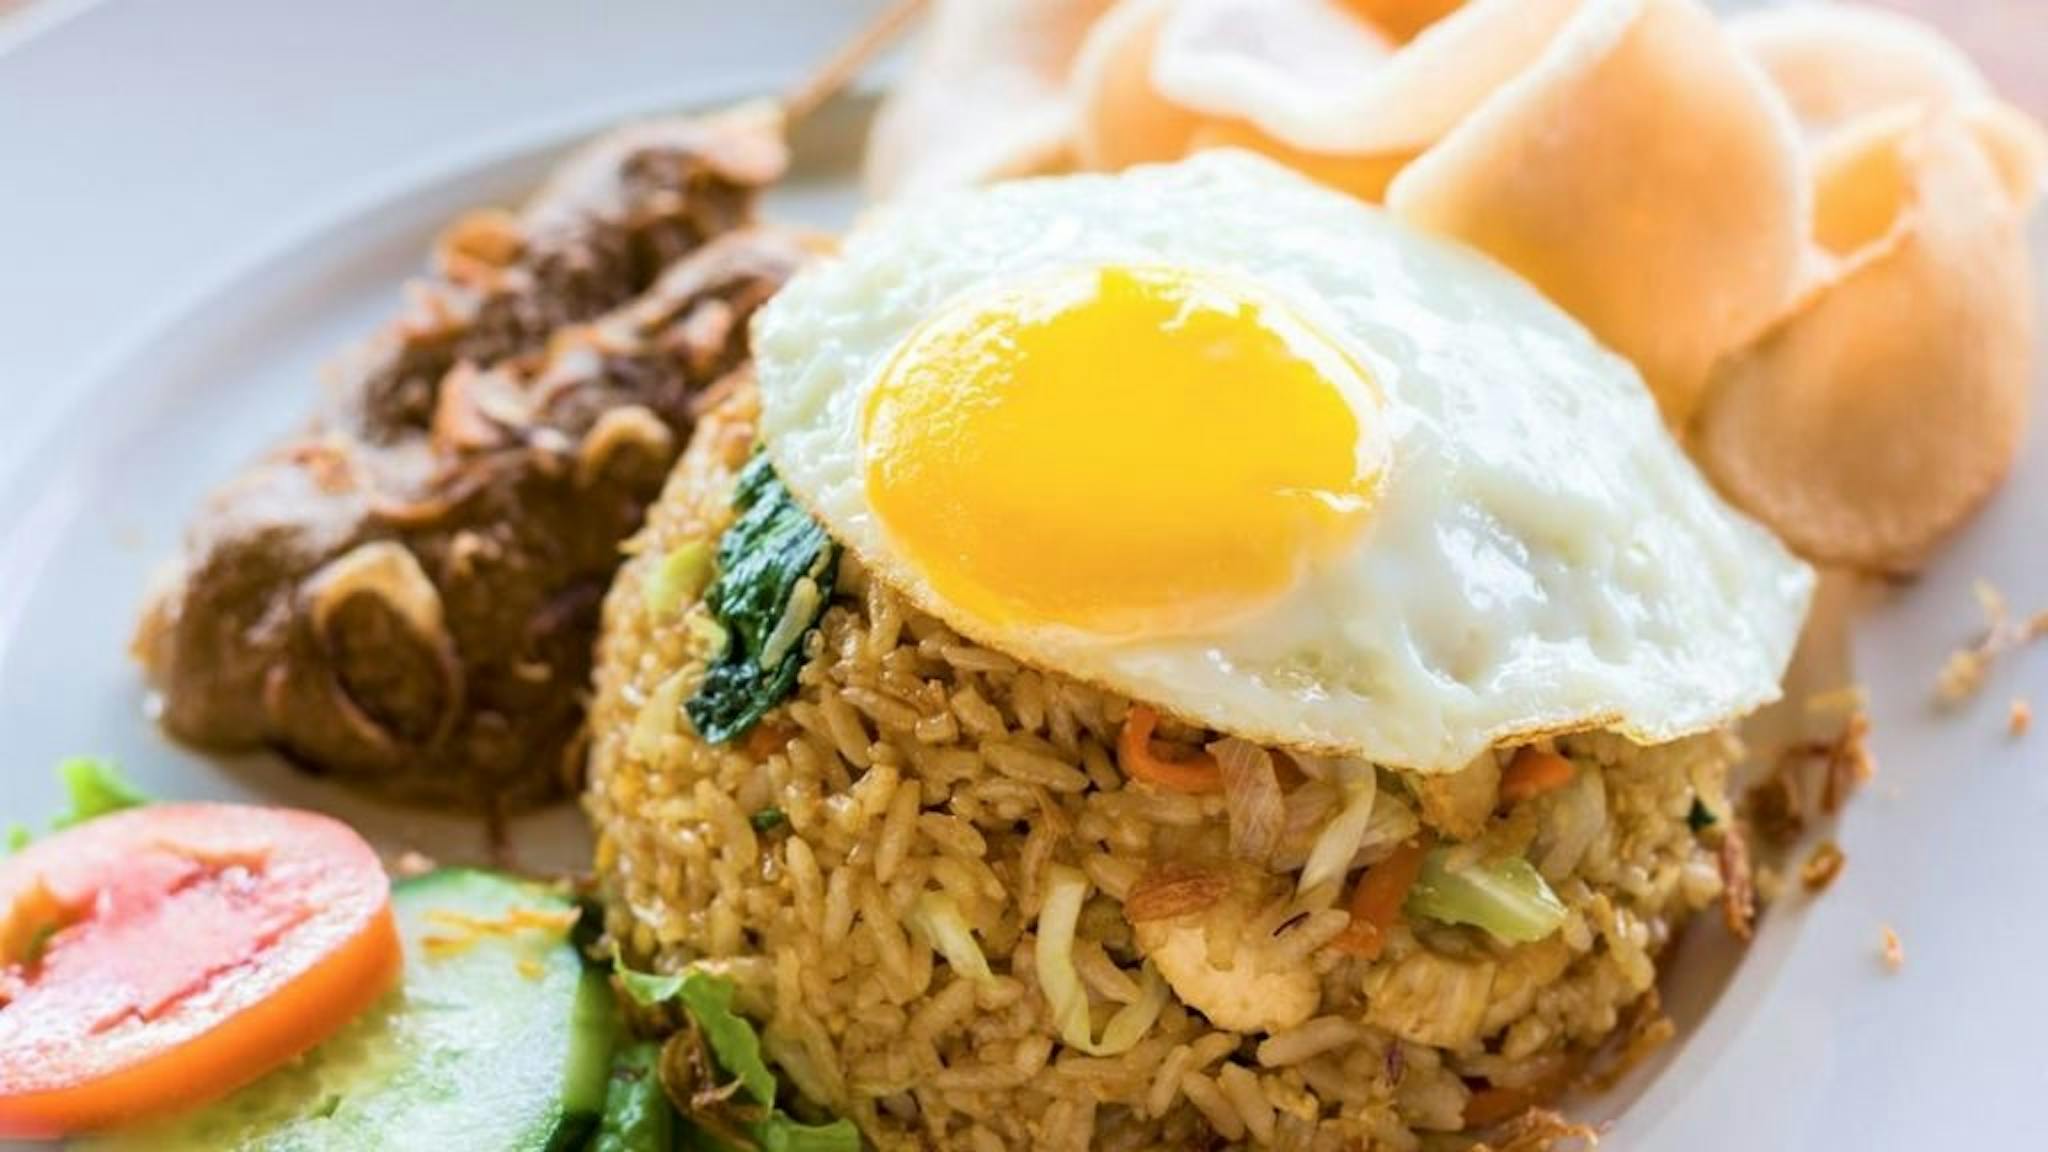 Will Asia dine on plant-based eggs?